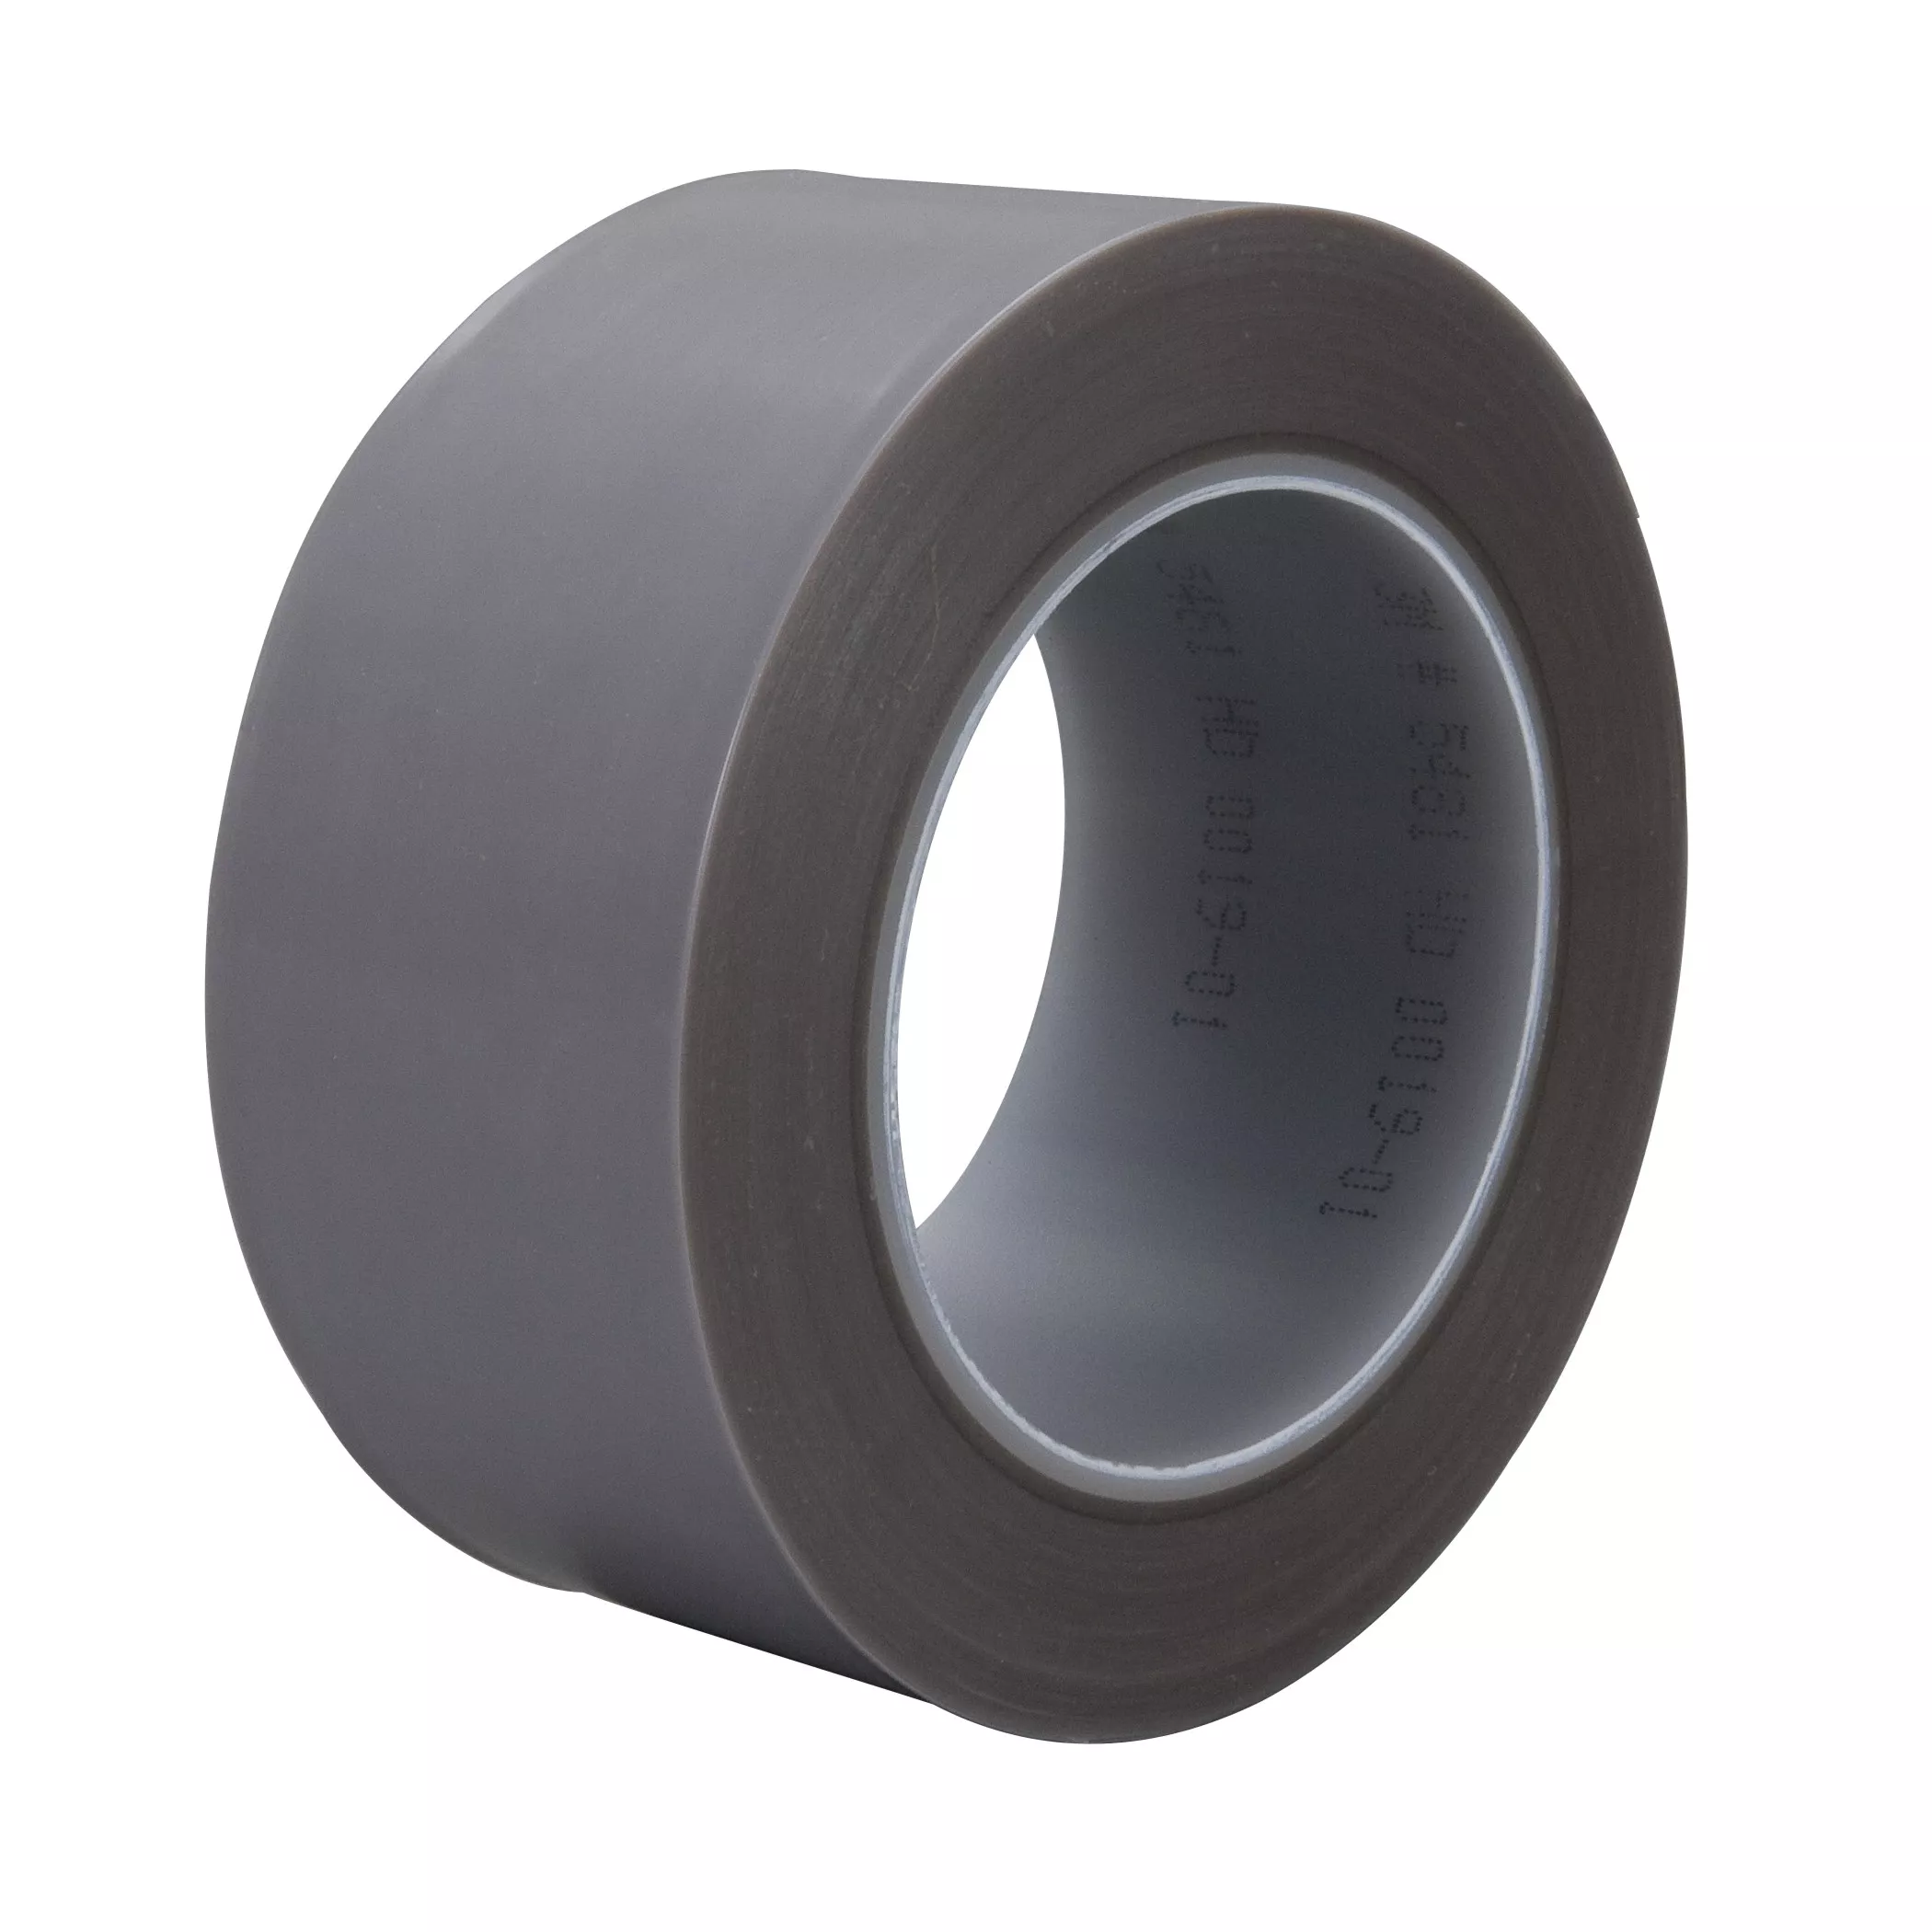 Product Number 5481 | 3M™ PTFE Film Tape 5481